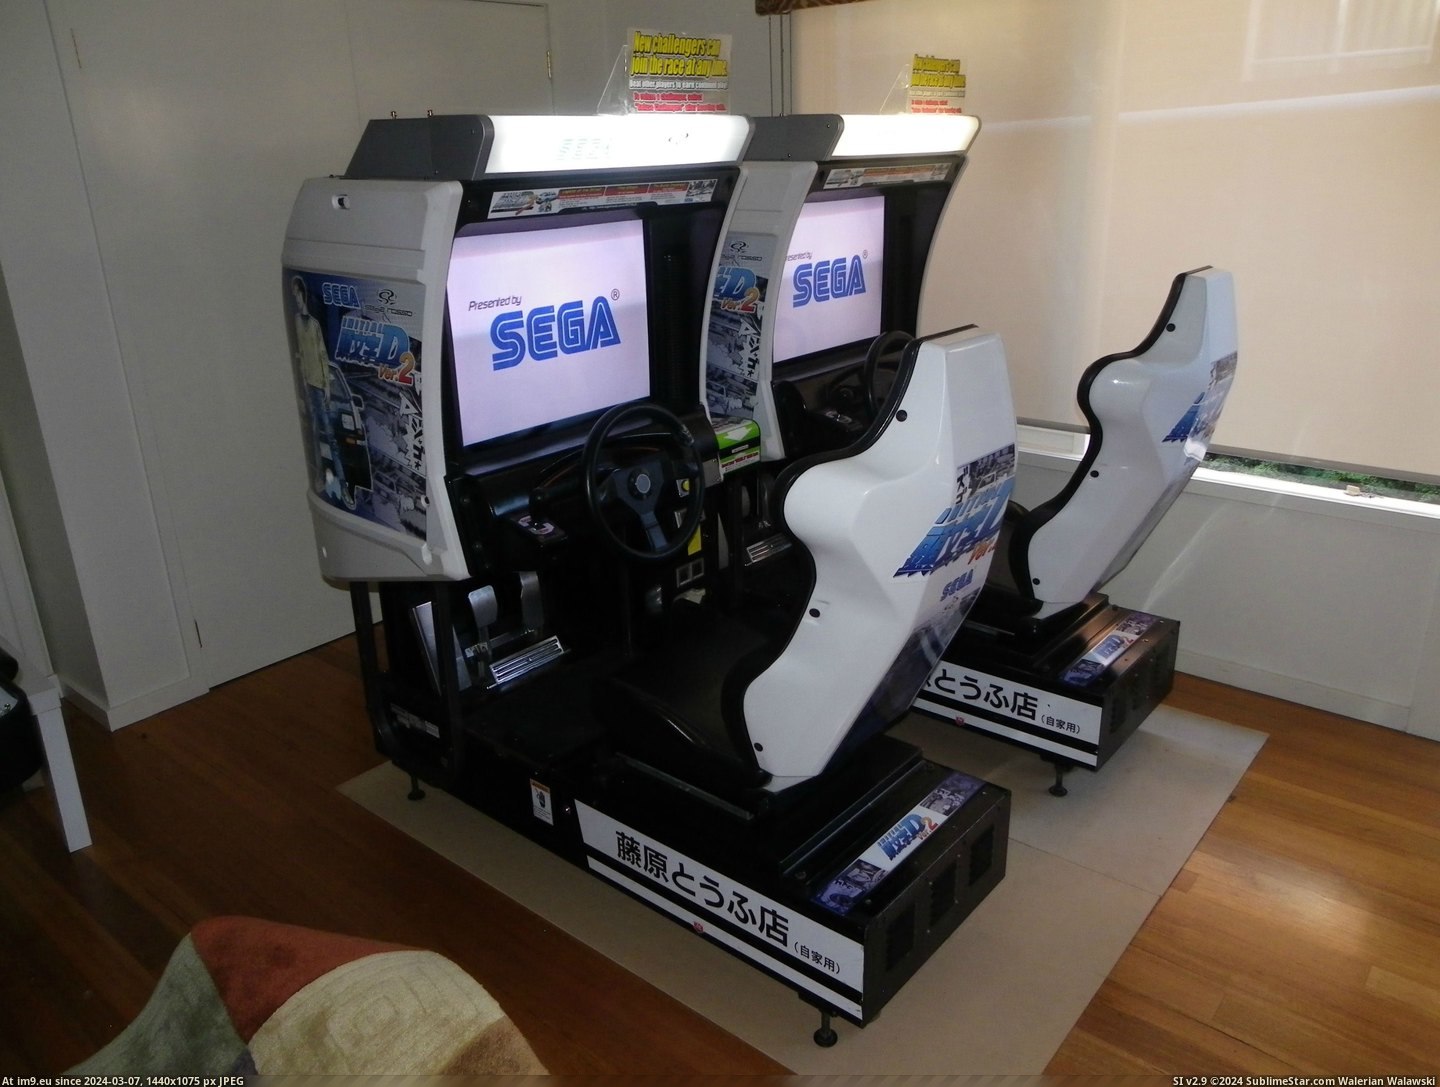 #Gaming #Two #Arcade #Fixing #Racer #Games #Finished [Gaming] Just finished fixing up two arcade racer games! 24 Pic. (Изображение из альбом My r/GAMING favs))